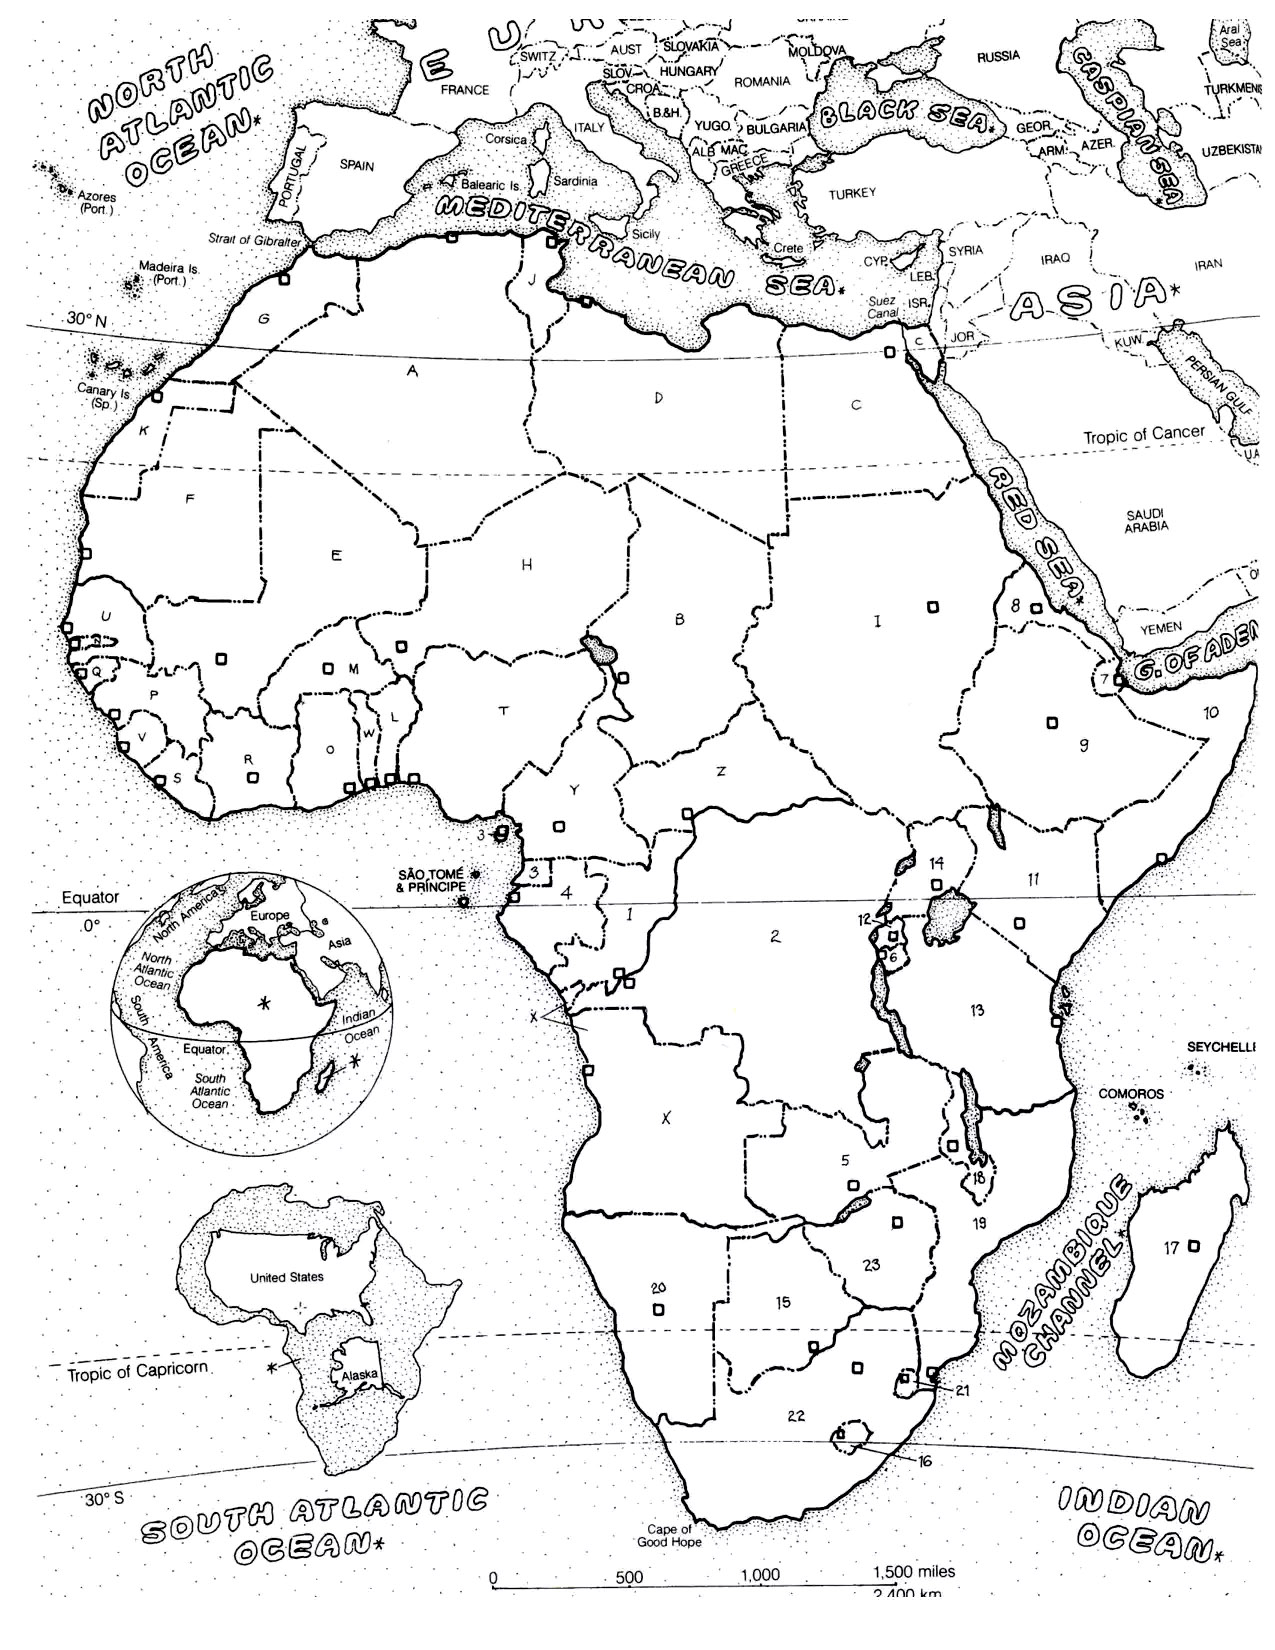 The map of the African continent